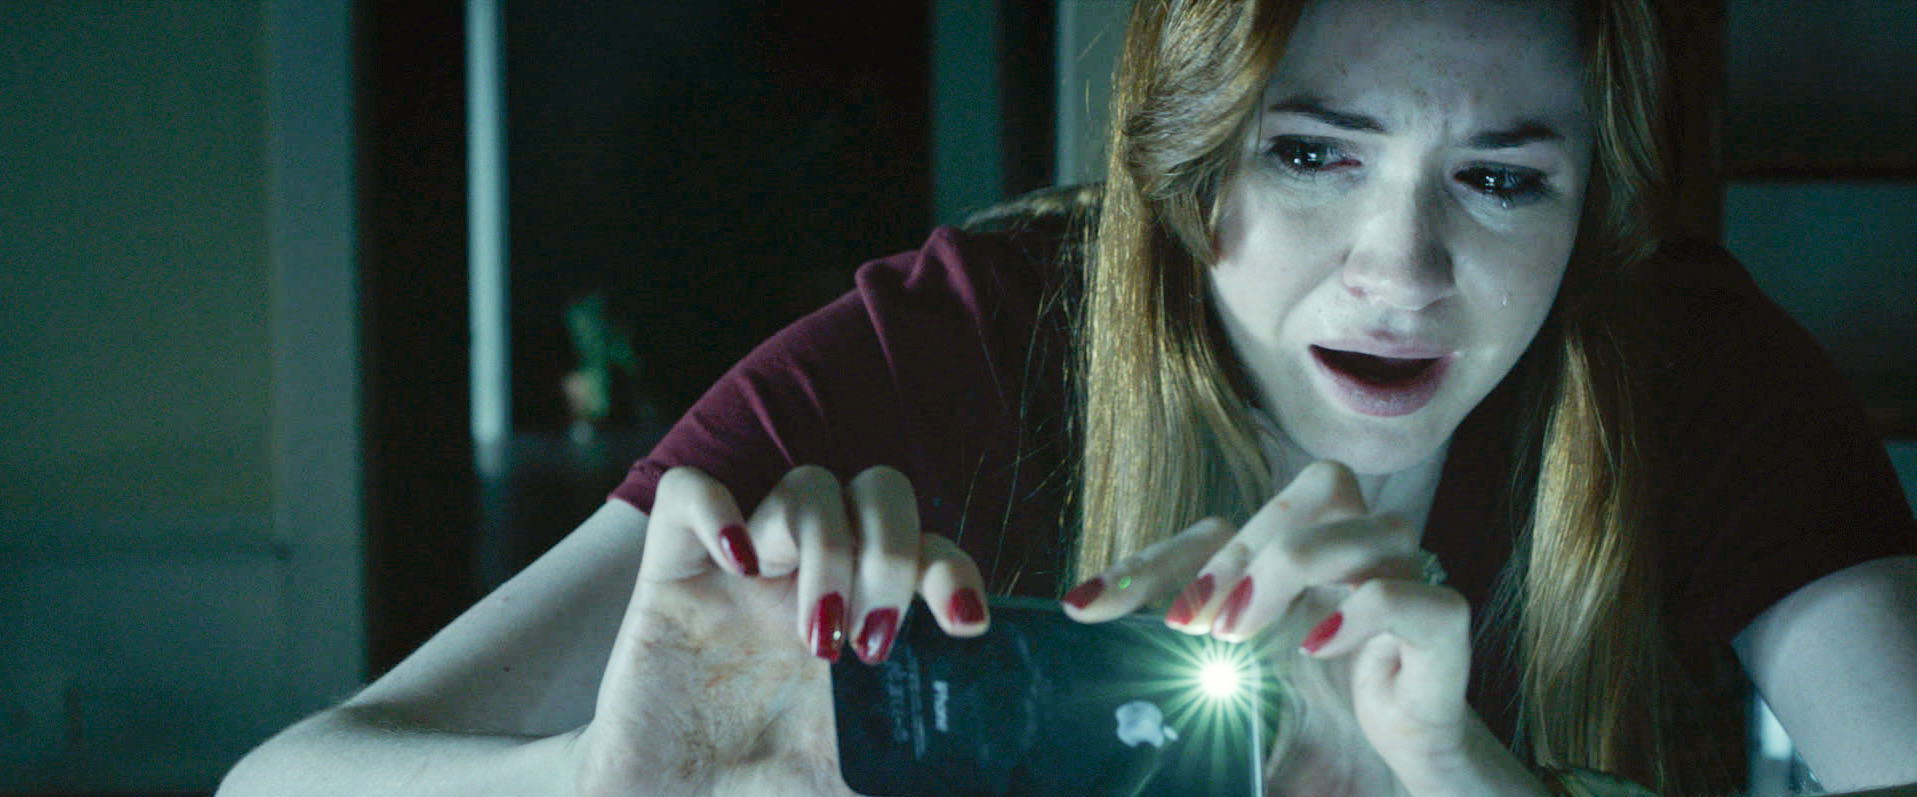 Interview] 'Oculus' Star Karen Gillan On What Frightened Her While Shooting  and Her Favorite Horror Films!! - Bloody Disgusting